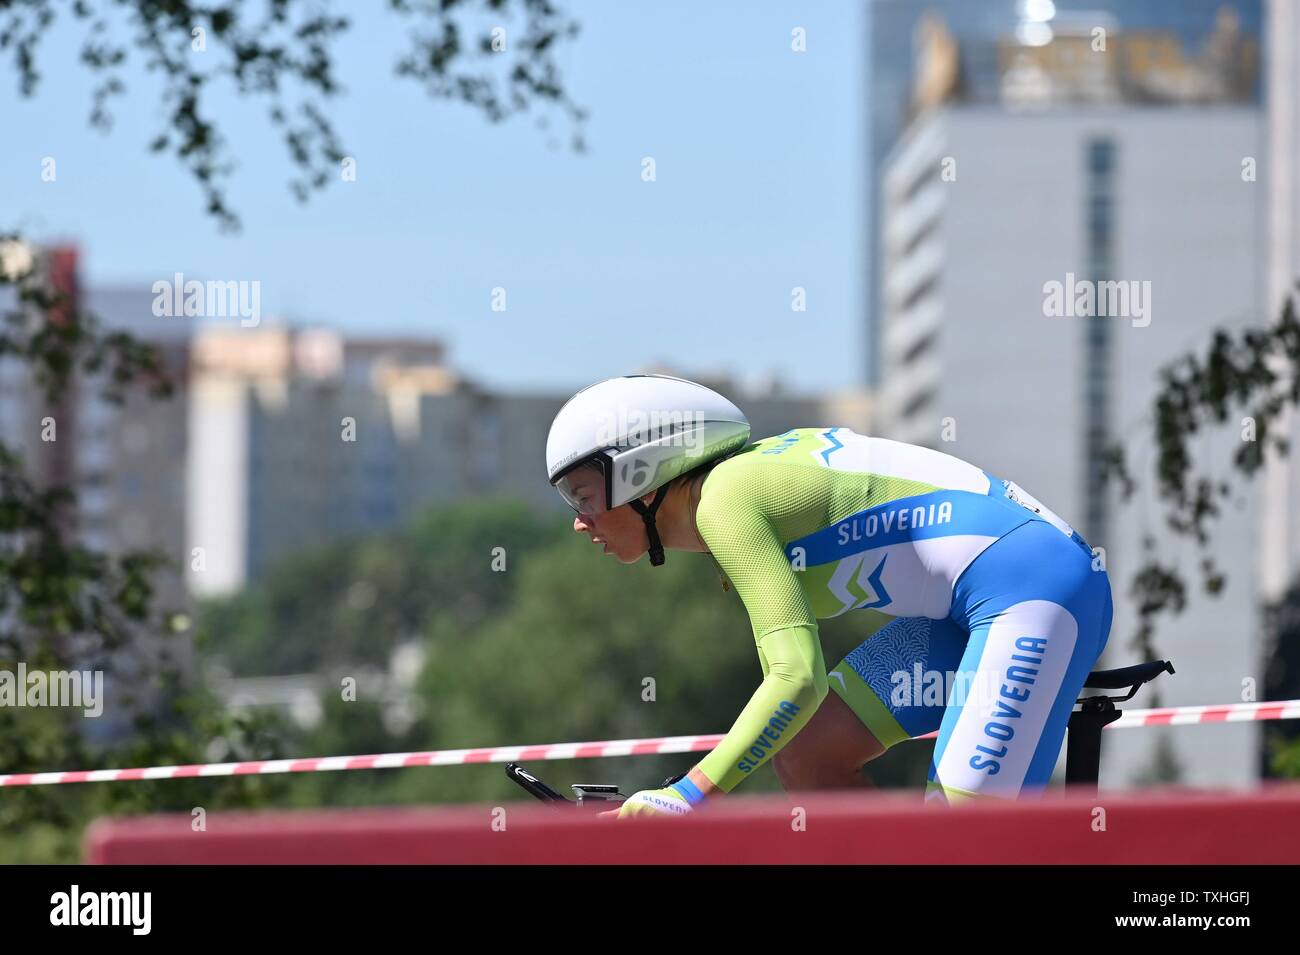 https://c8.alamy.com/comp/TXHGFJ/minsk-belarus-25-june-2019-eugenia-bujak-slo-in-the-cycling-time-trial-at-the-2nd-european-games-credit-sport-in-picturesalamy-live-news-TXHGFJ.jpg